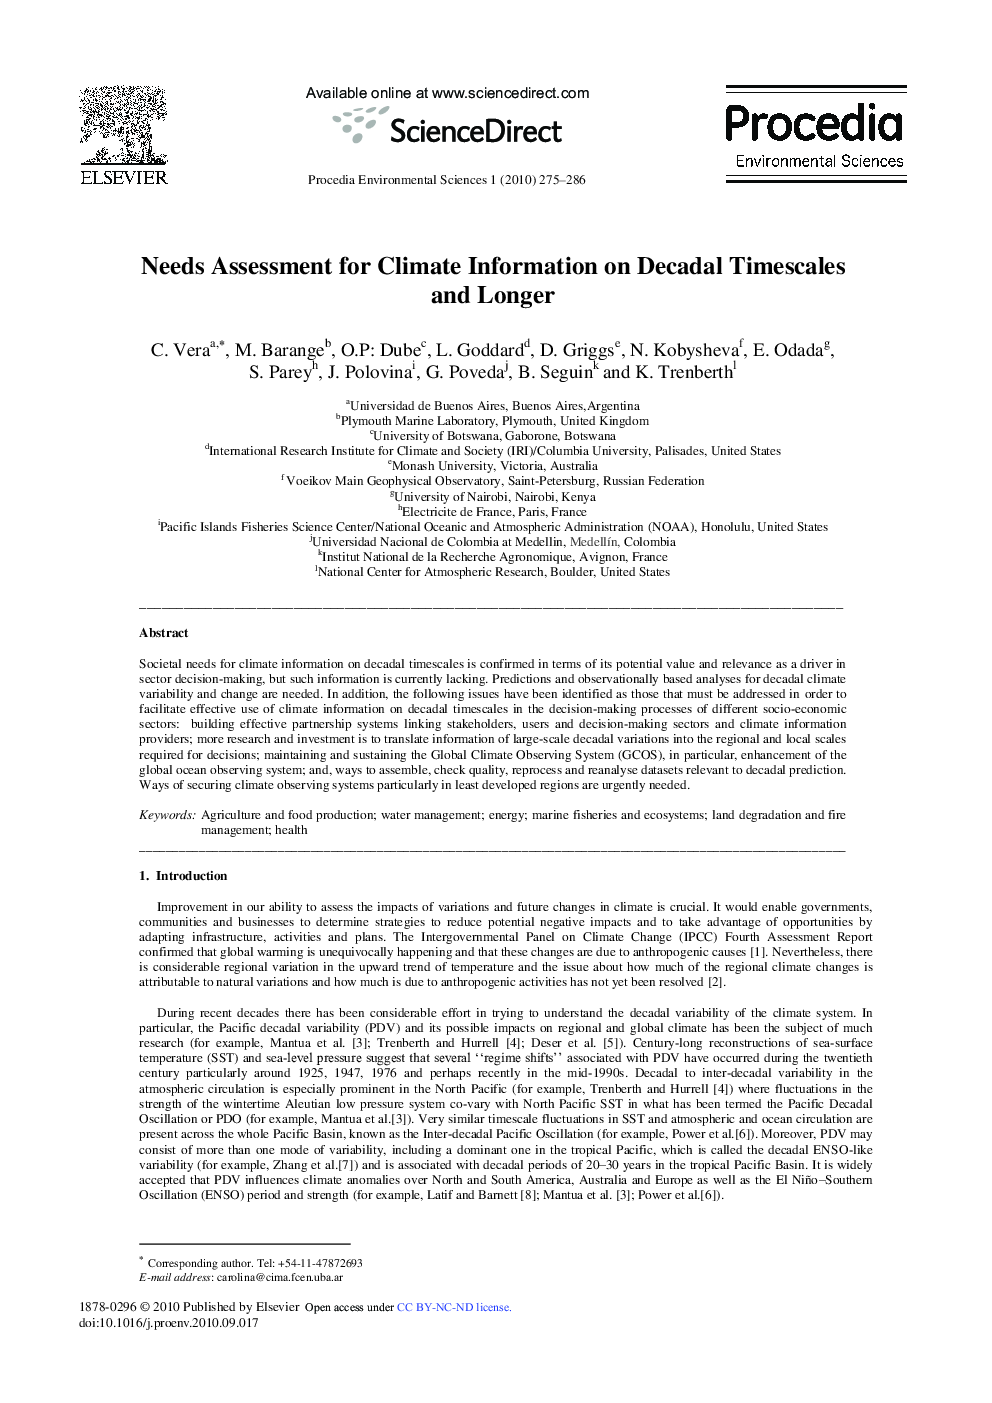 Needs Assessment for Climate Information on Decadal Timescales and Longer